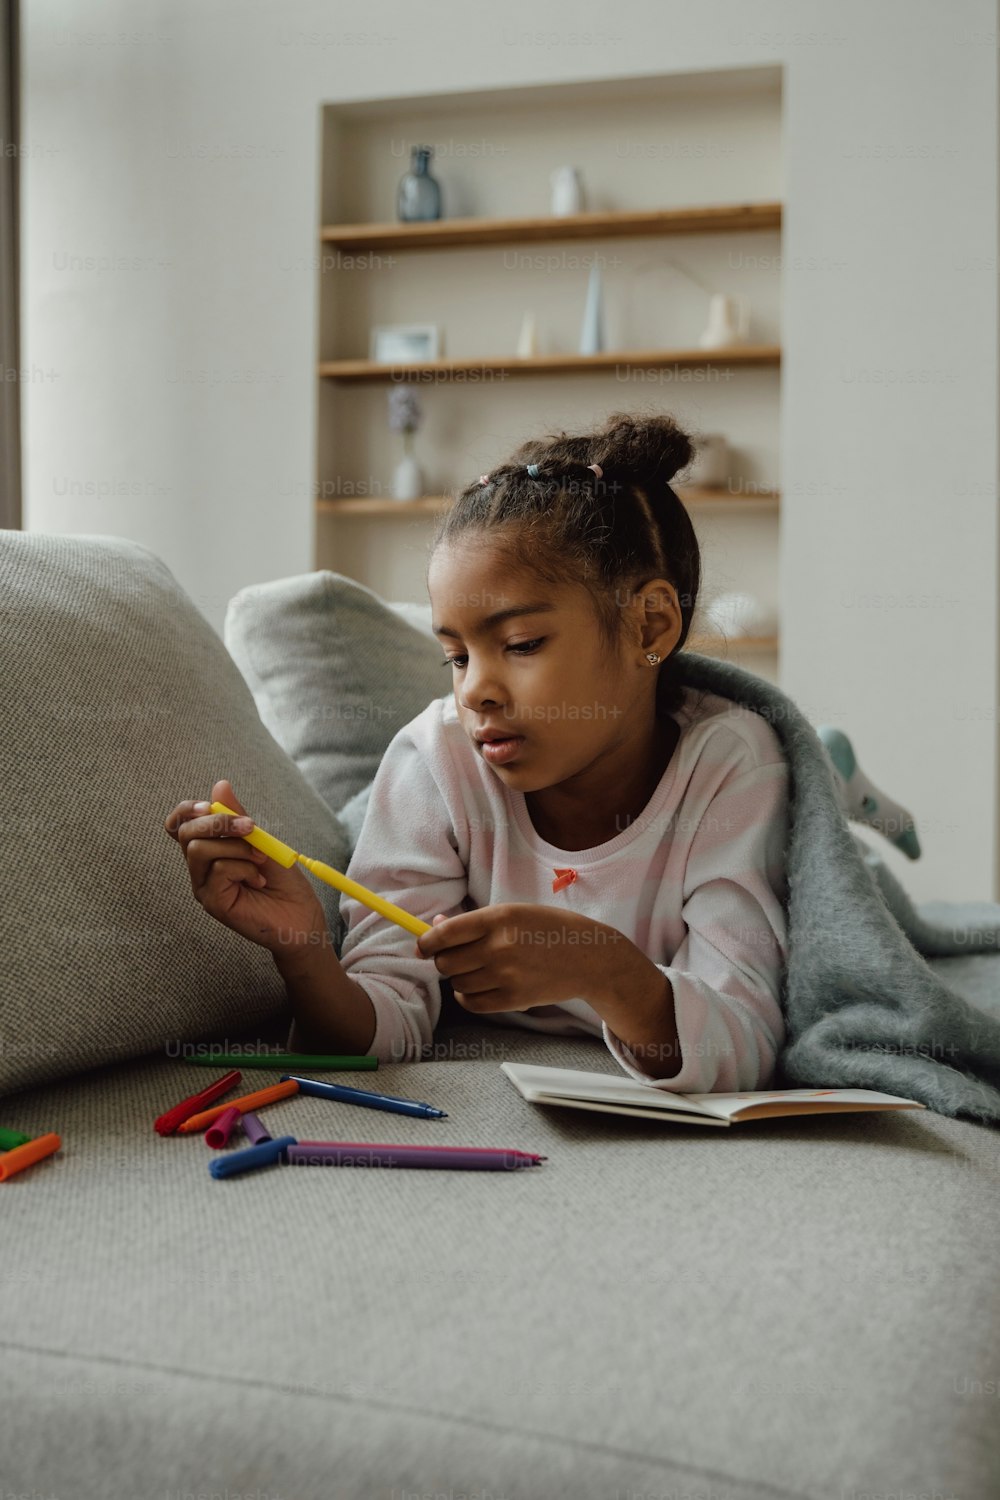 a little girl sitting on a couch with a book and pencils